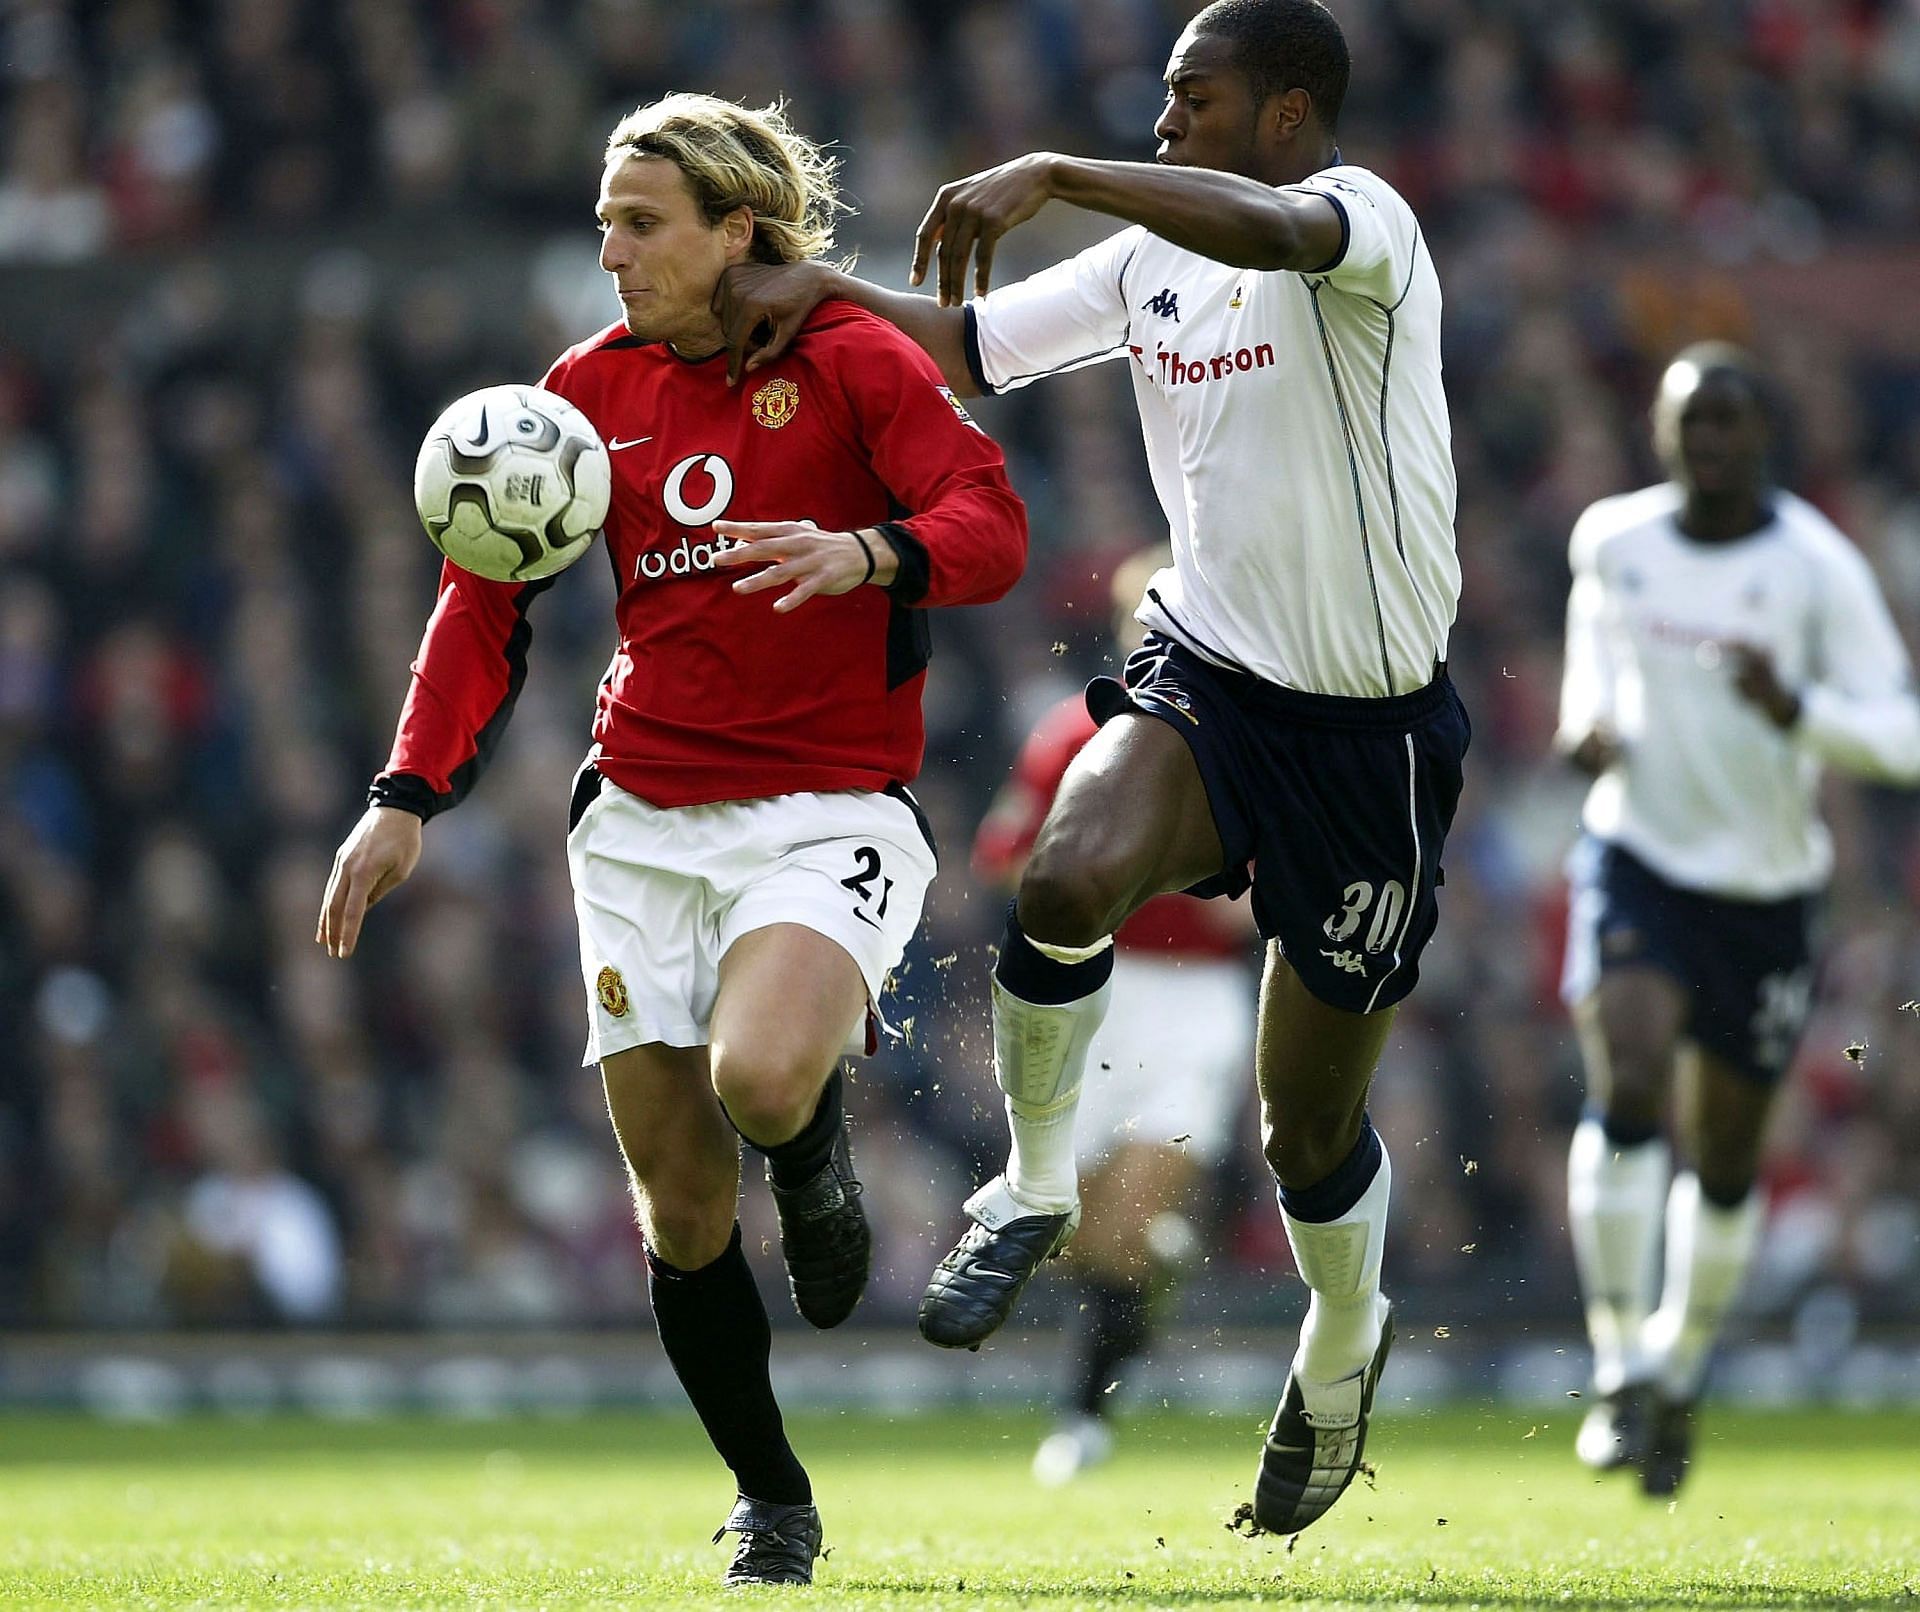 Diego Forlan in action for Manchester United.